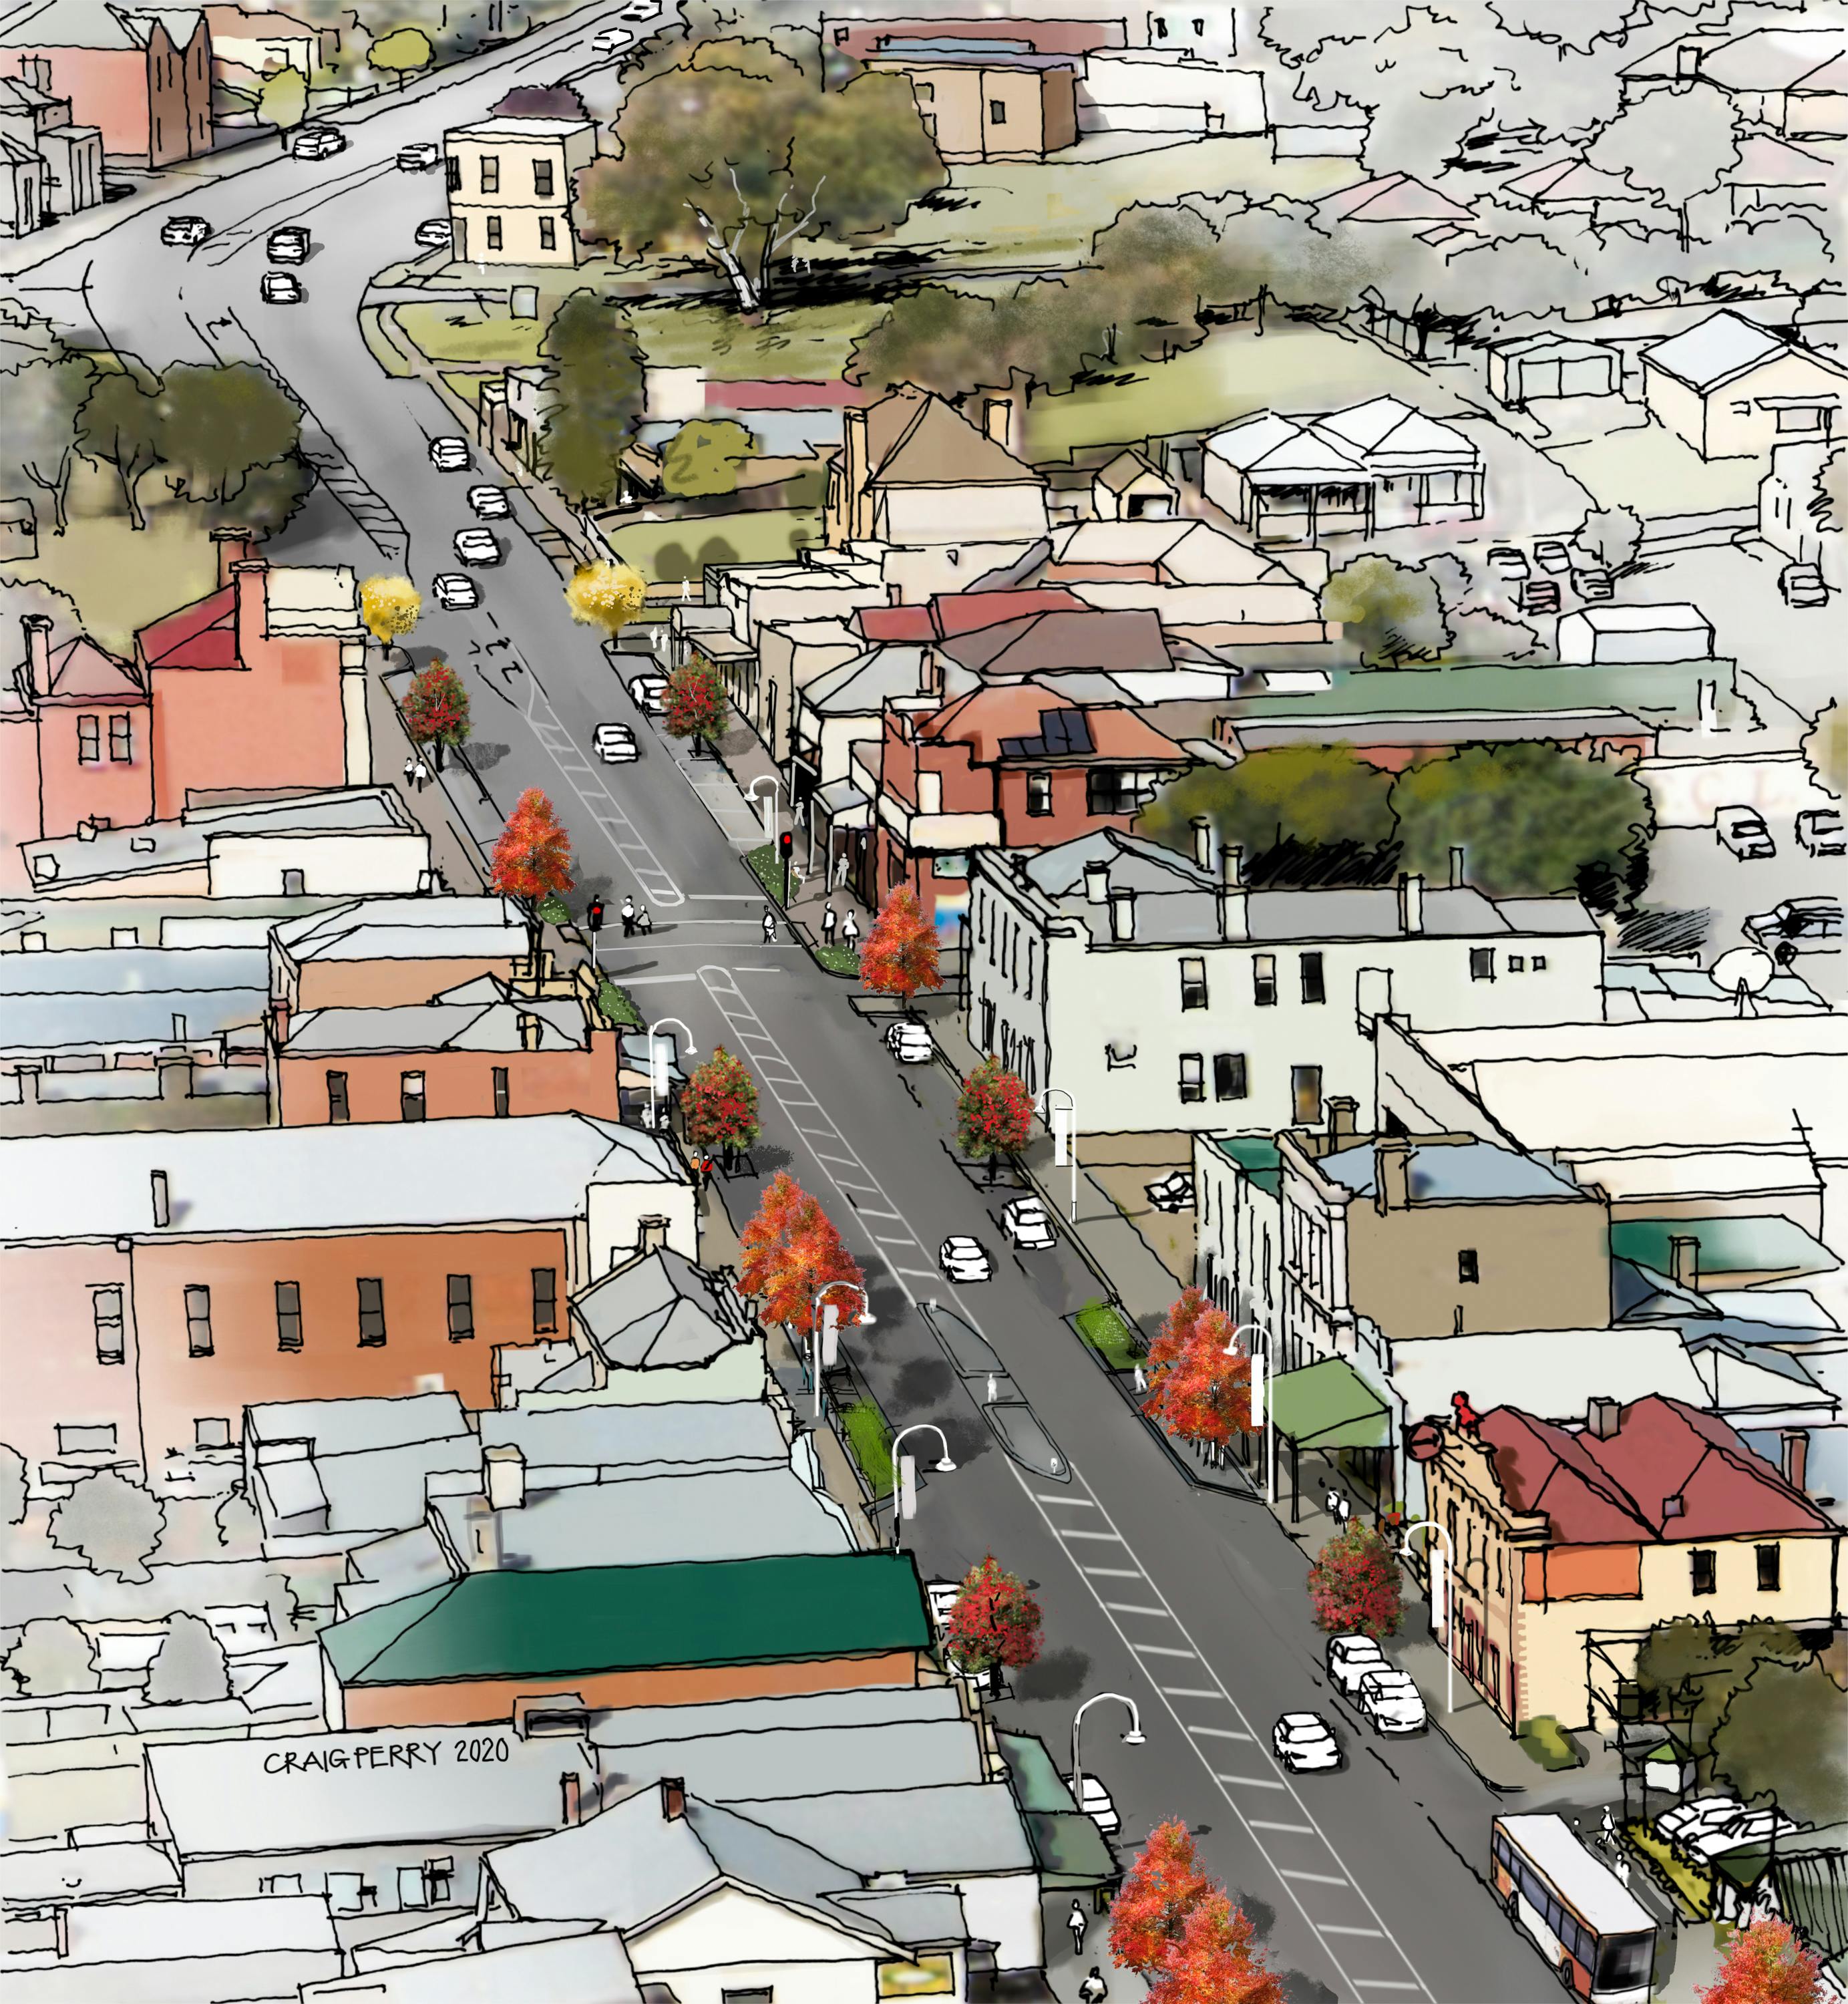 Aerial view of Sydney Street looking south with street trees and pedestrian refuges shown